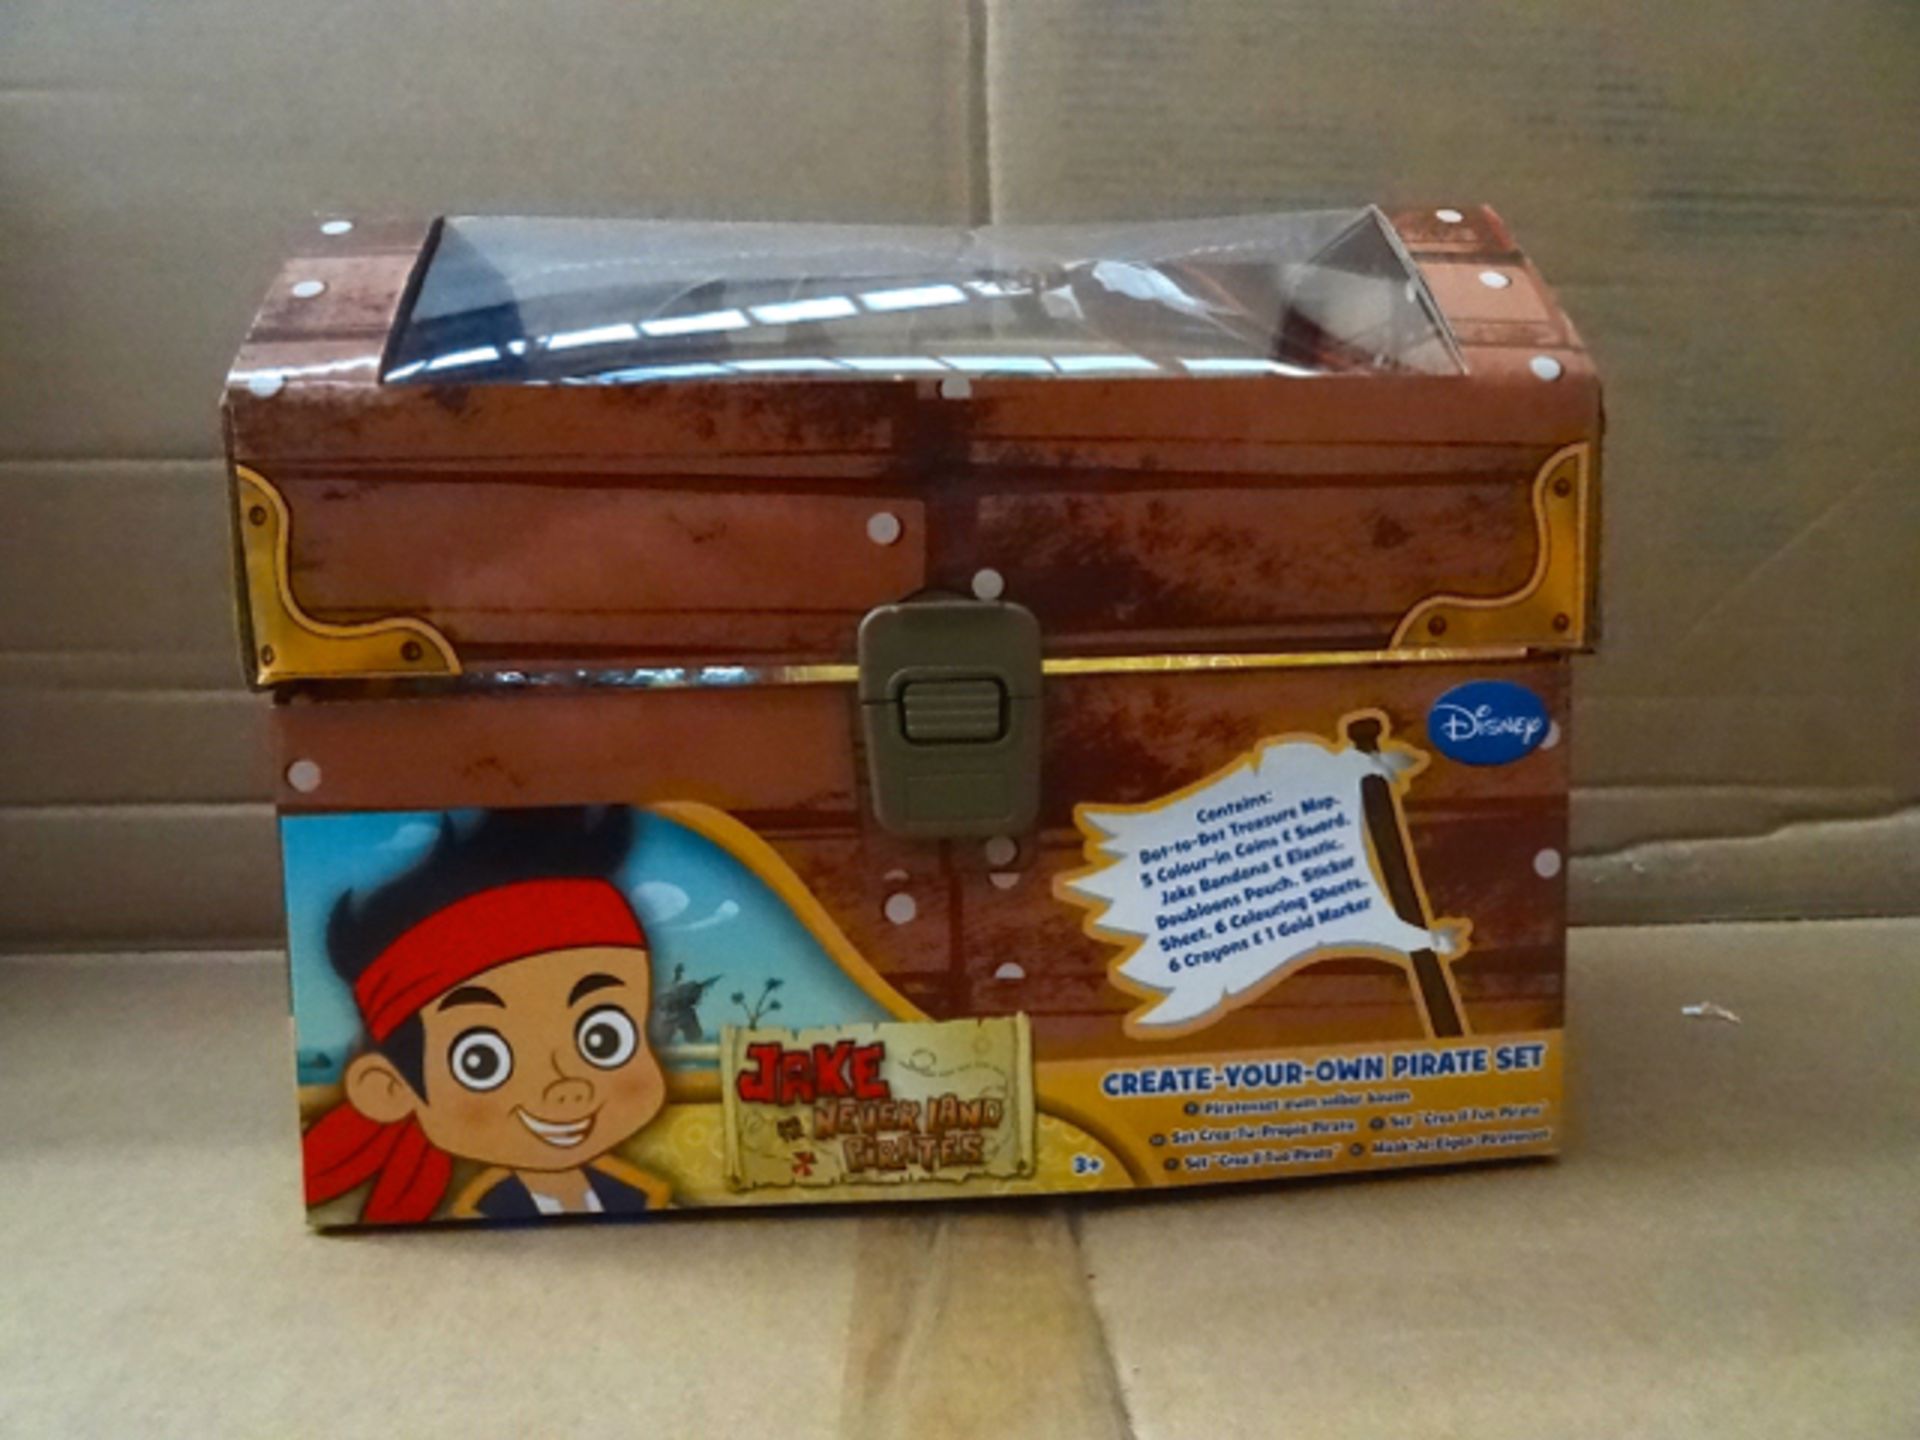 1 x Pallet to contain 240 x Disney Jake the Neverland Pirate Create Your Own Pirate Set. RRP £20